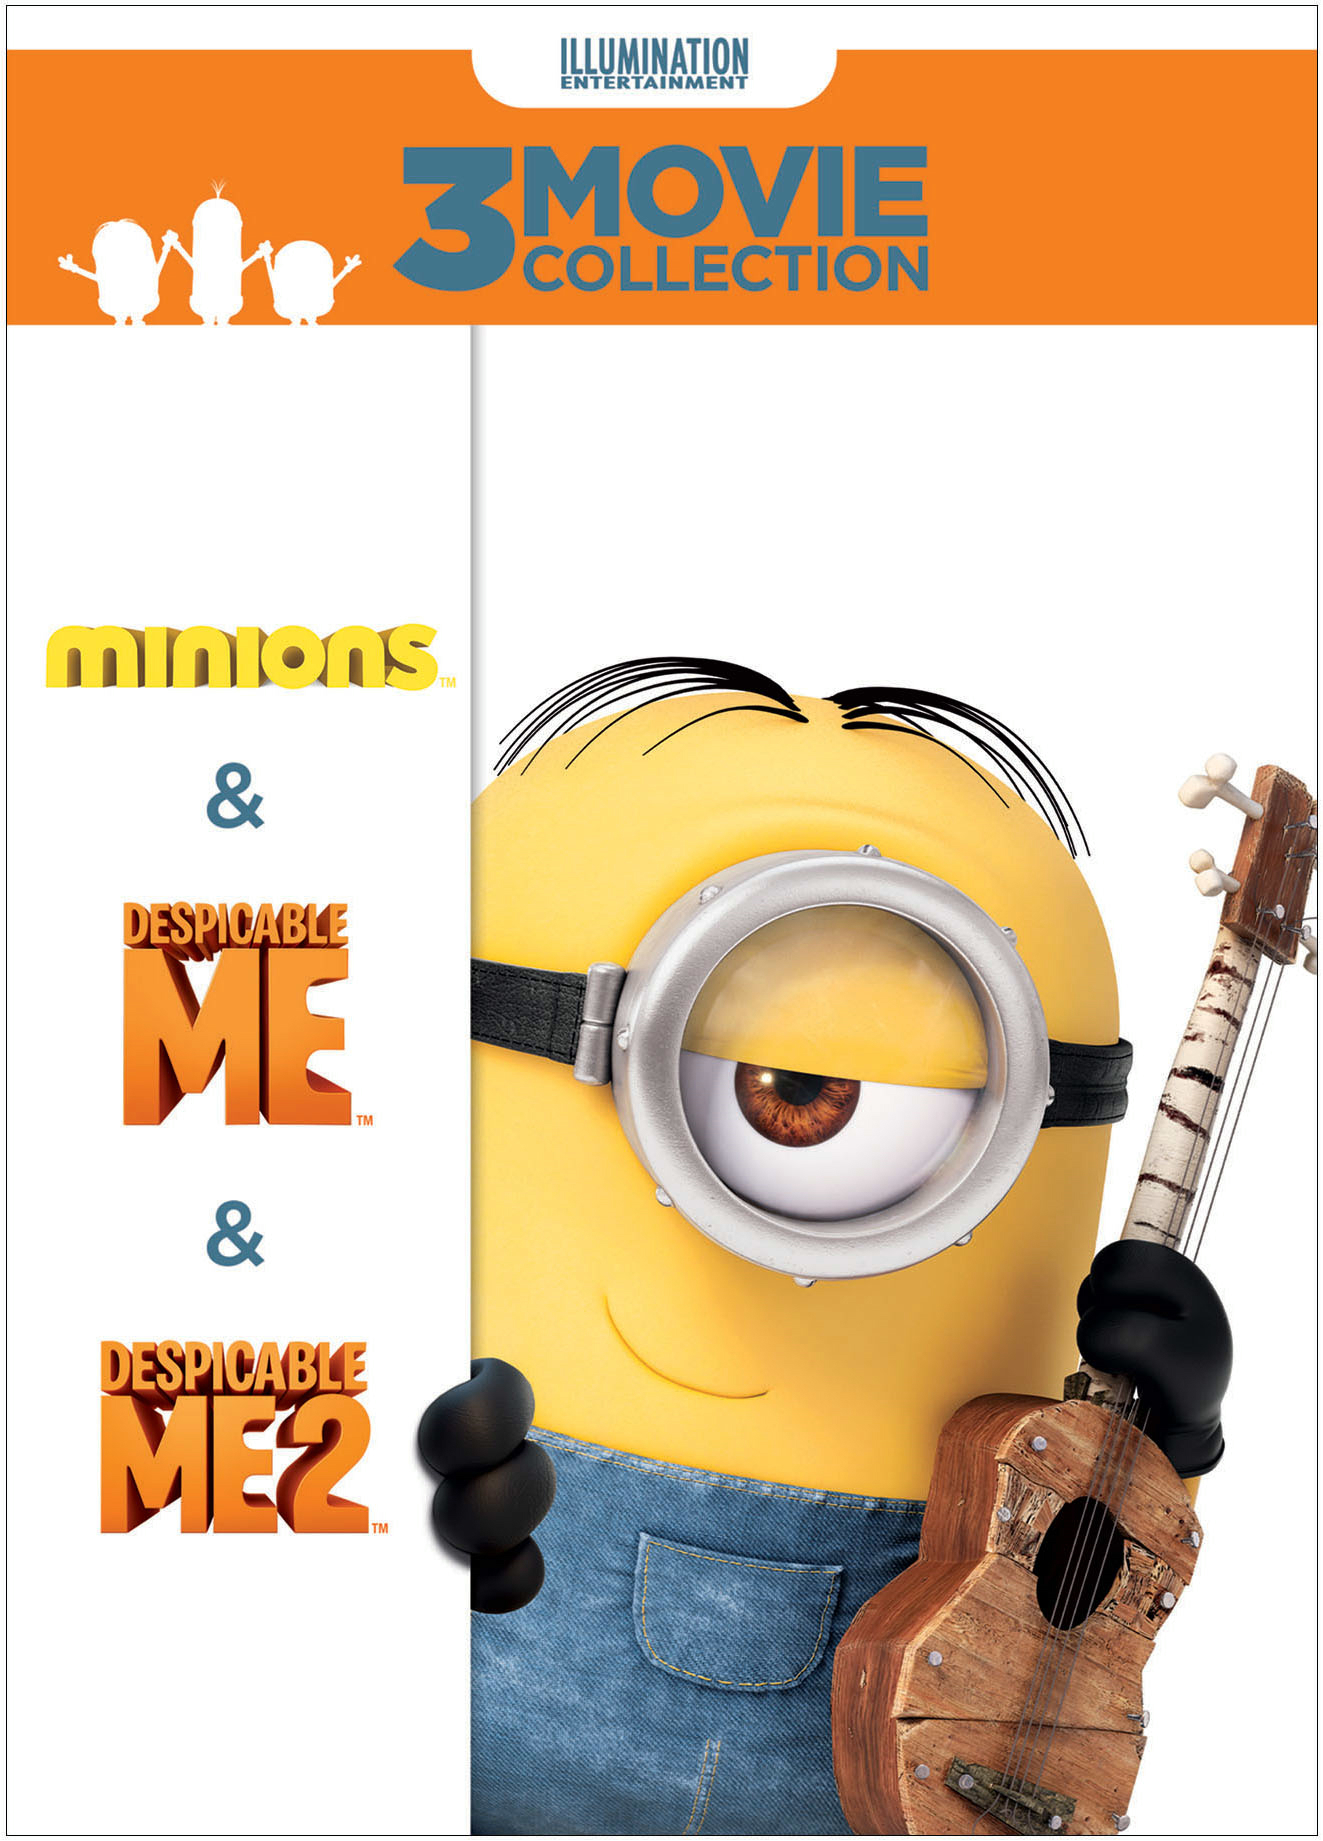 Despicable Me 3-Movie Collection (DVD Triple Feature) - DVD   - Animation Movies On DVD - Movies On GRUV